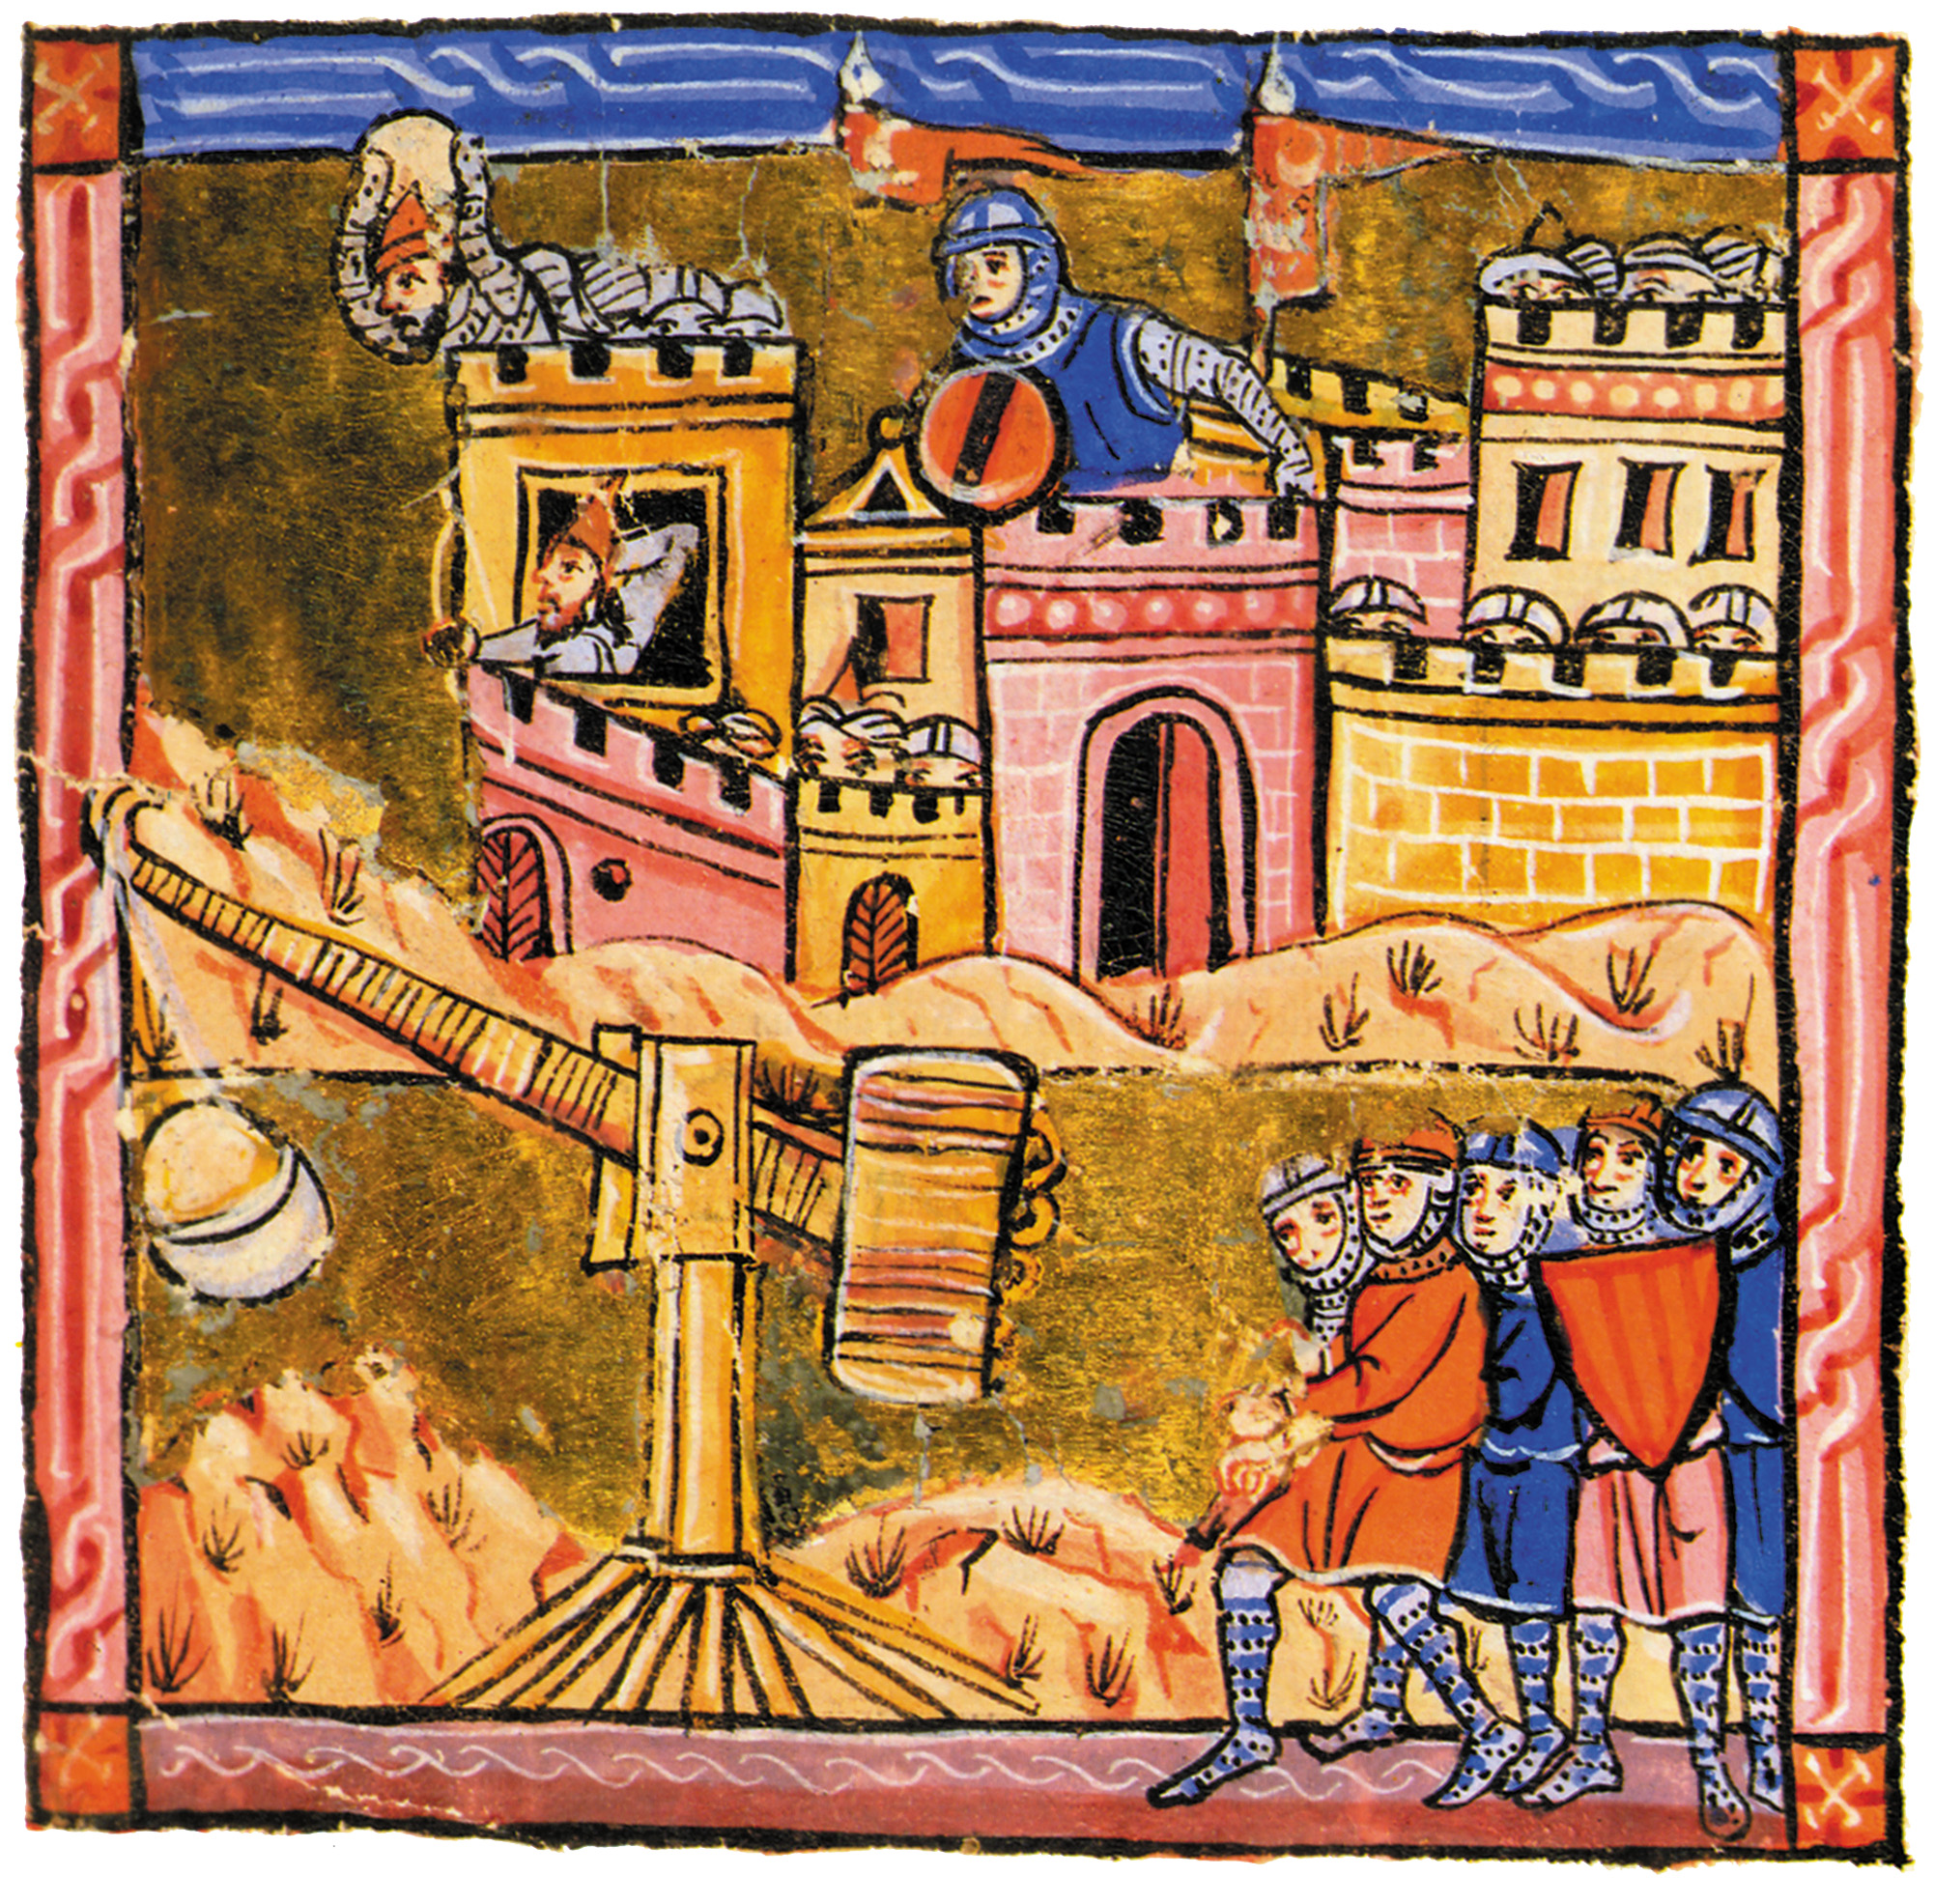 In this 13th century illustration, a trebuchet assaults the fortress at Acre during the Third Crusade.